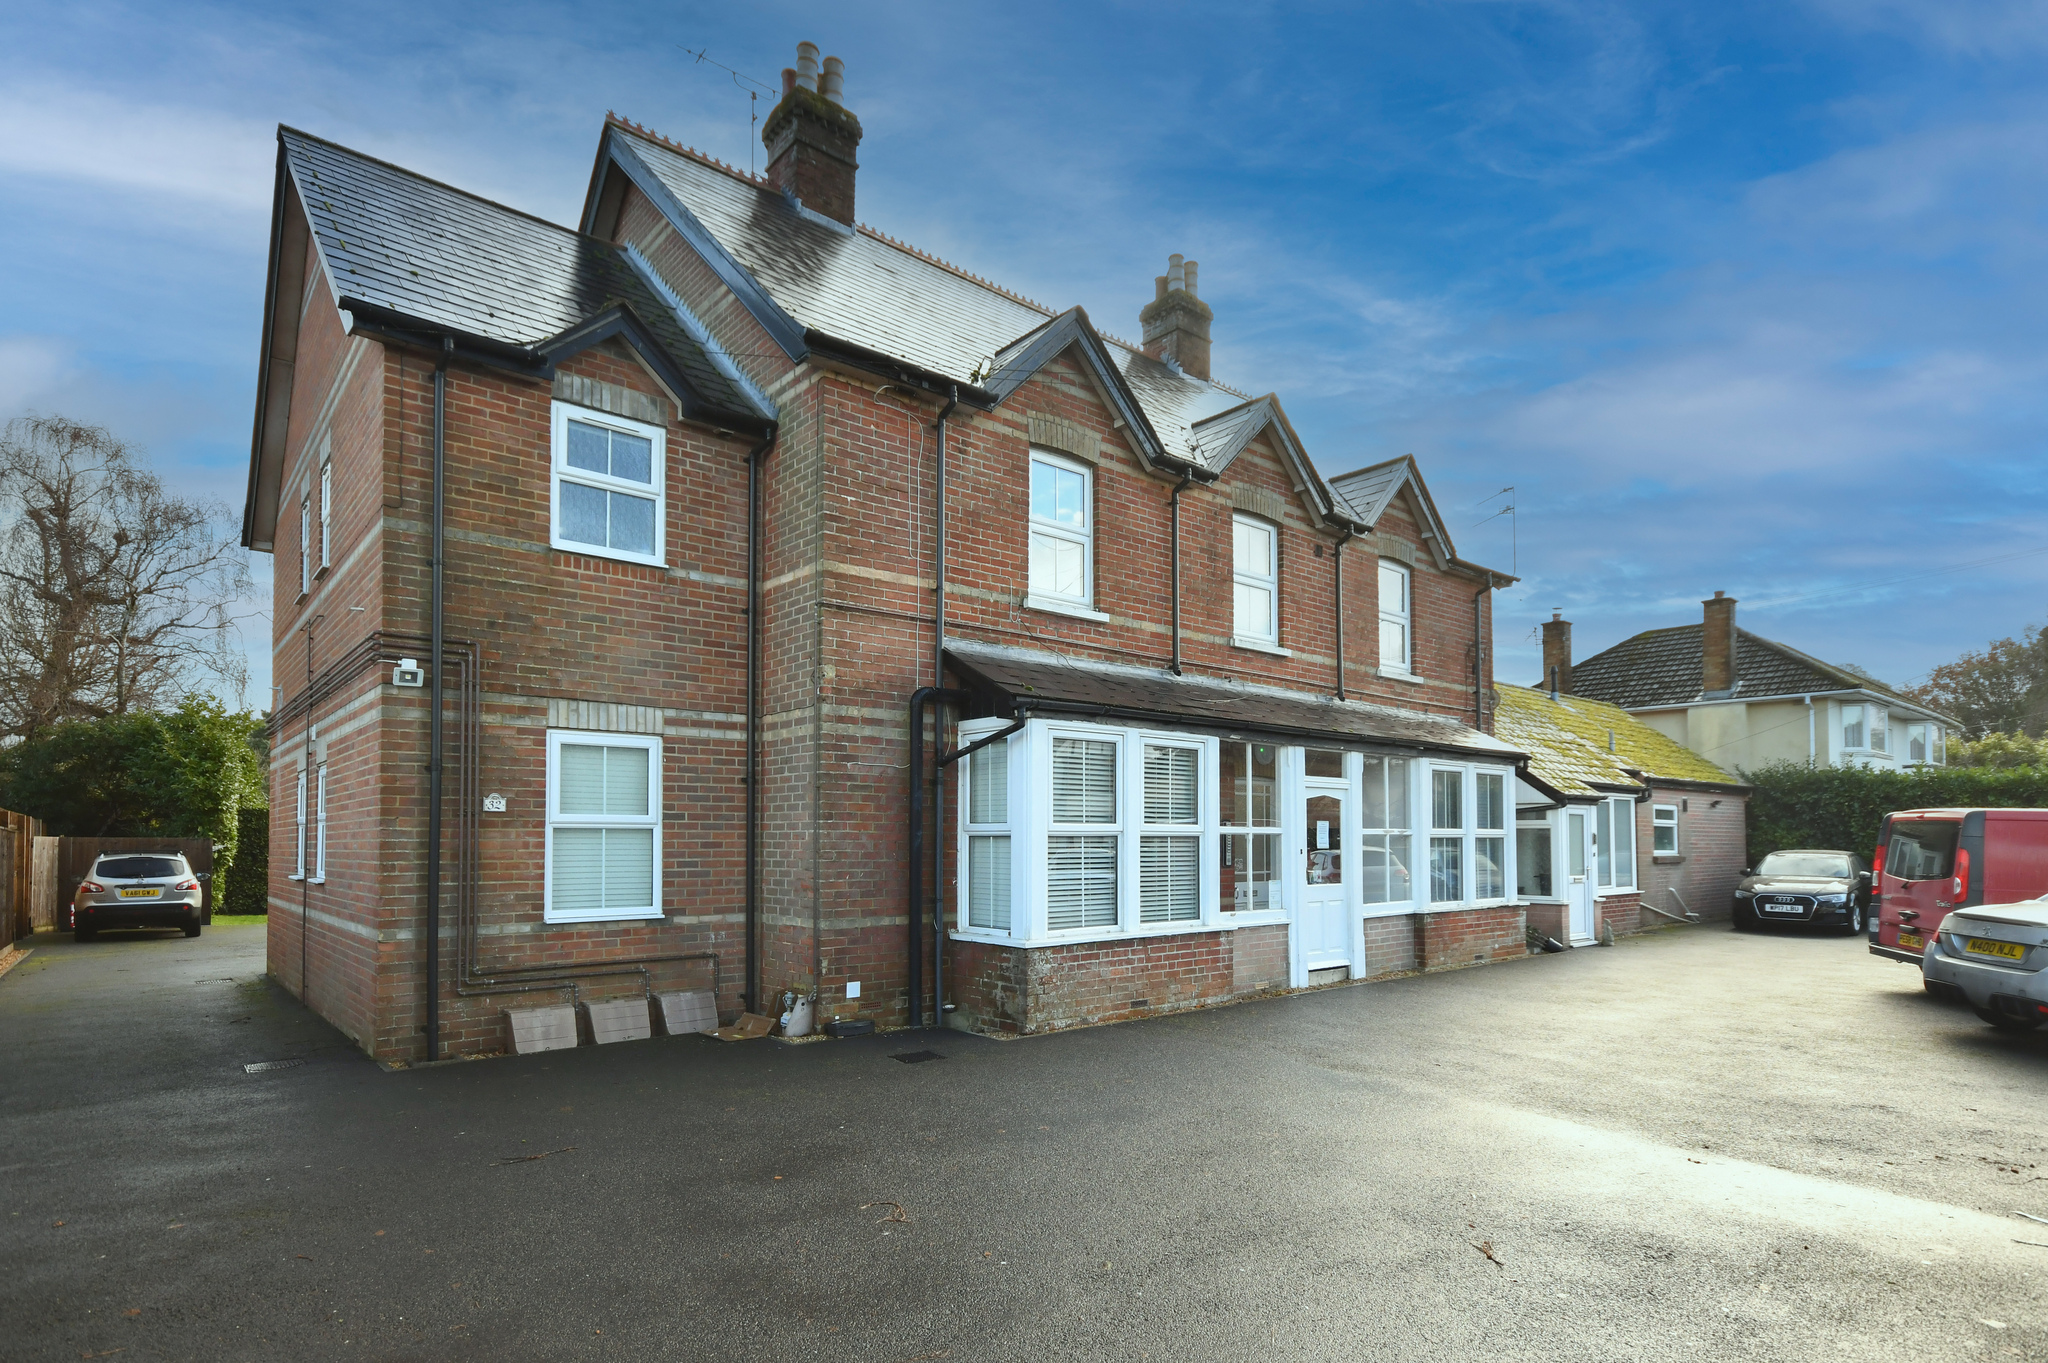 1 bed ground floor flat to rent in Church Road, Ferndown  - Property Image 1